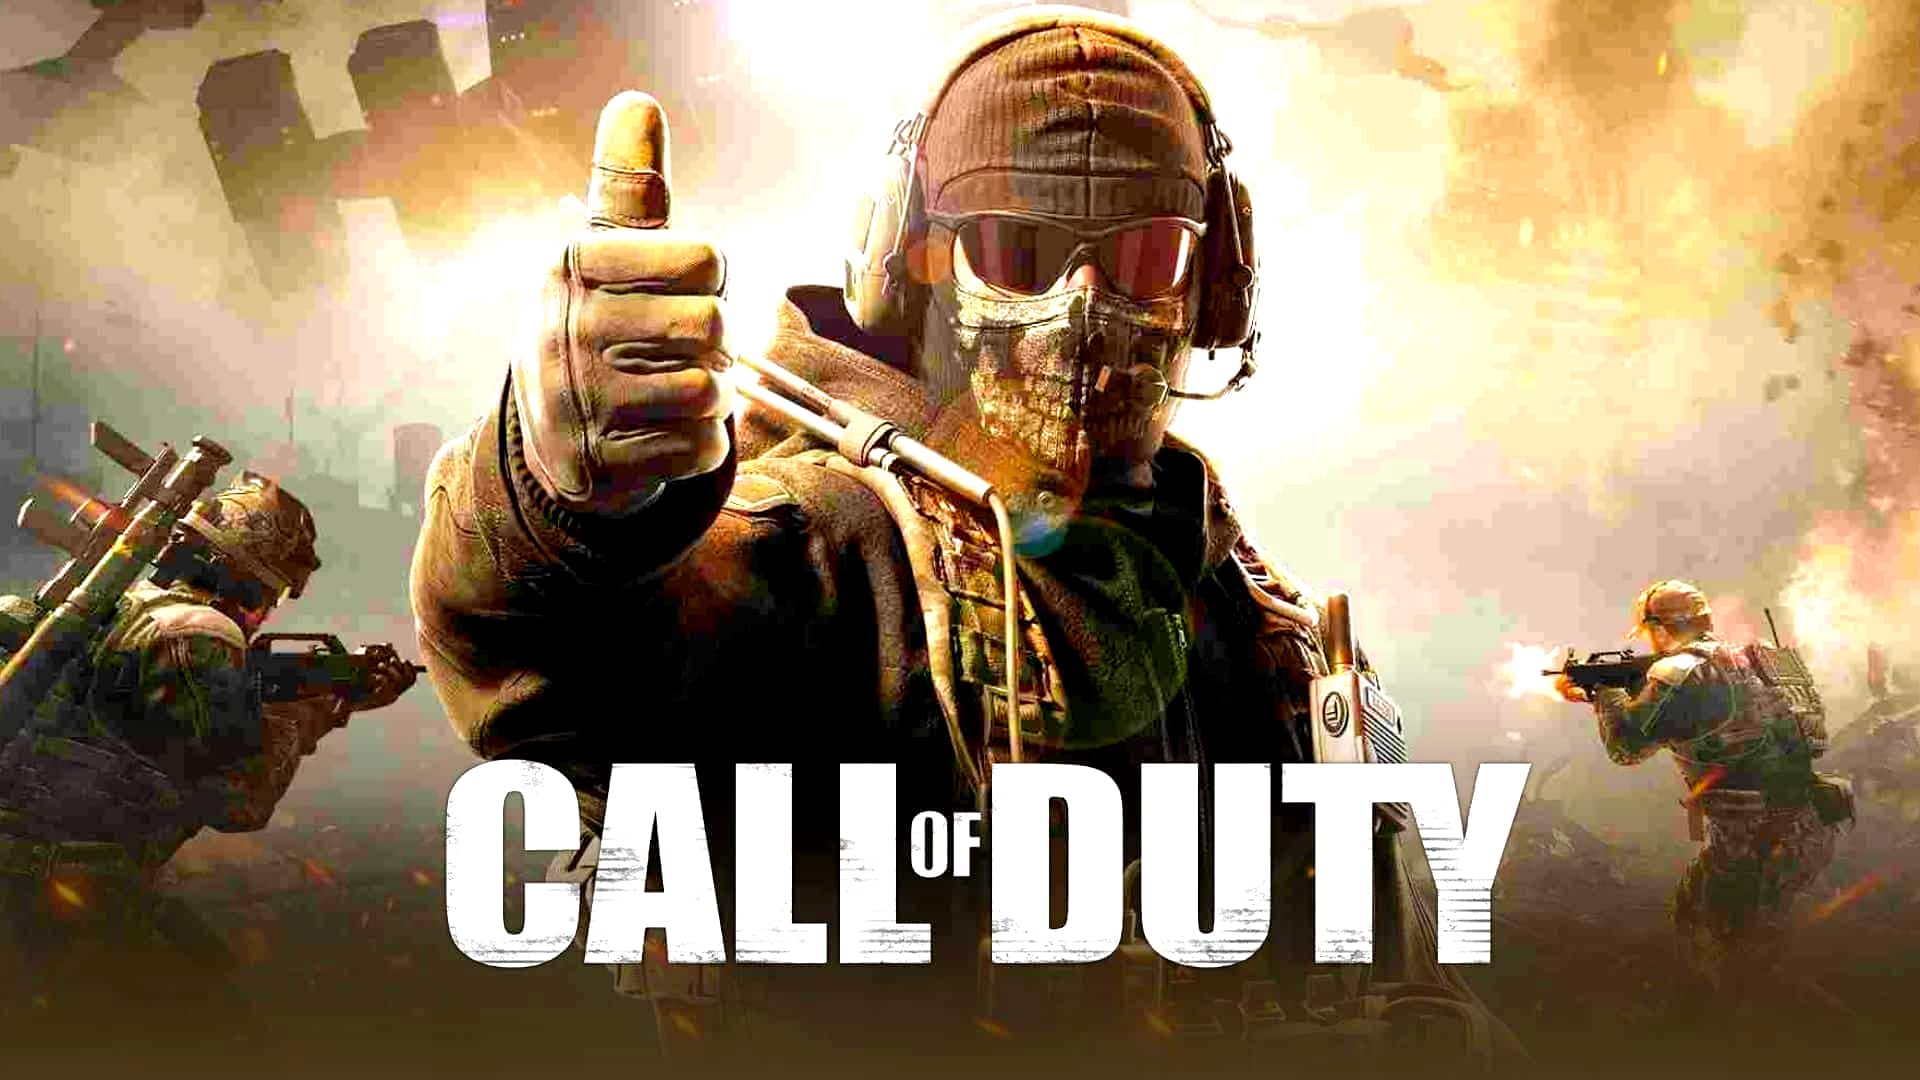 Call of Duty 2023 Seemingly Confirms Big Break from Tradition